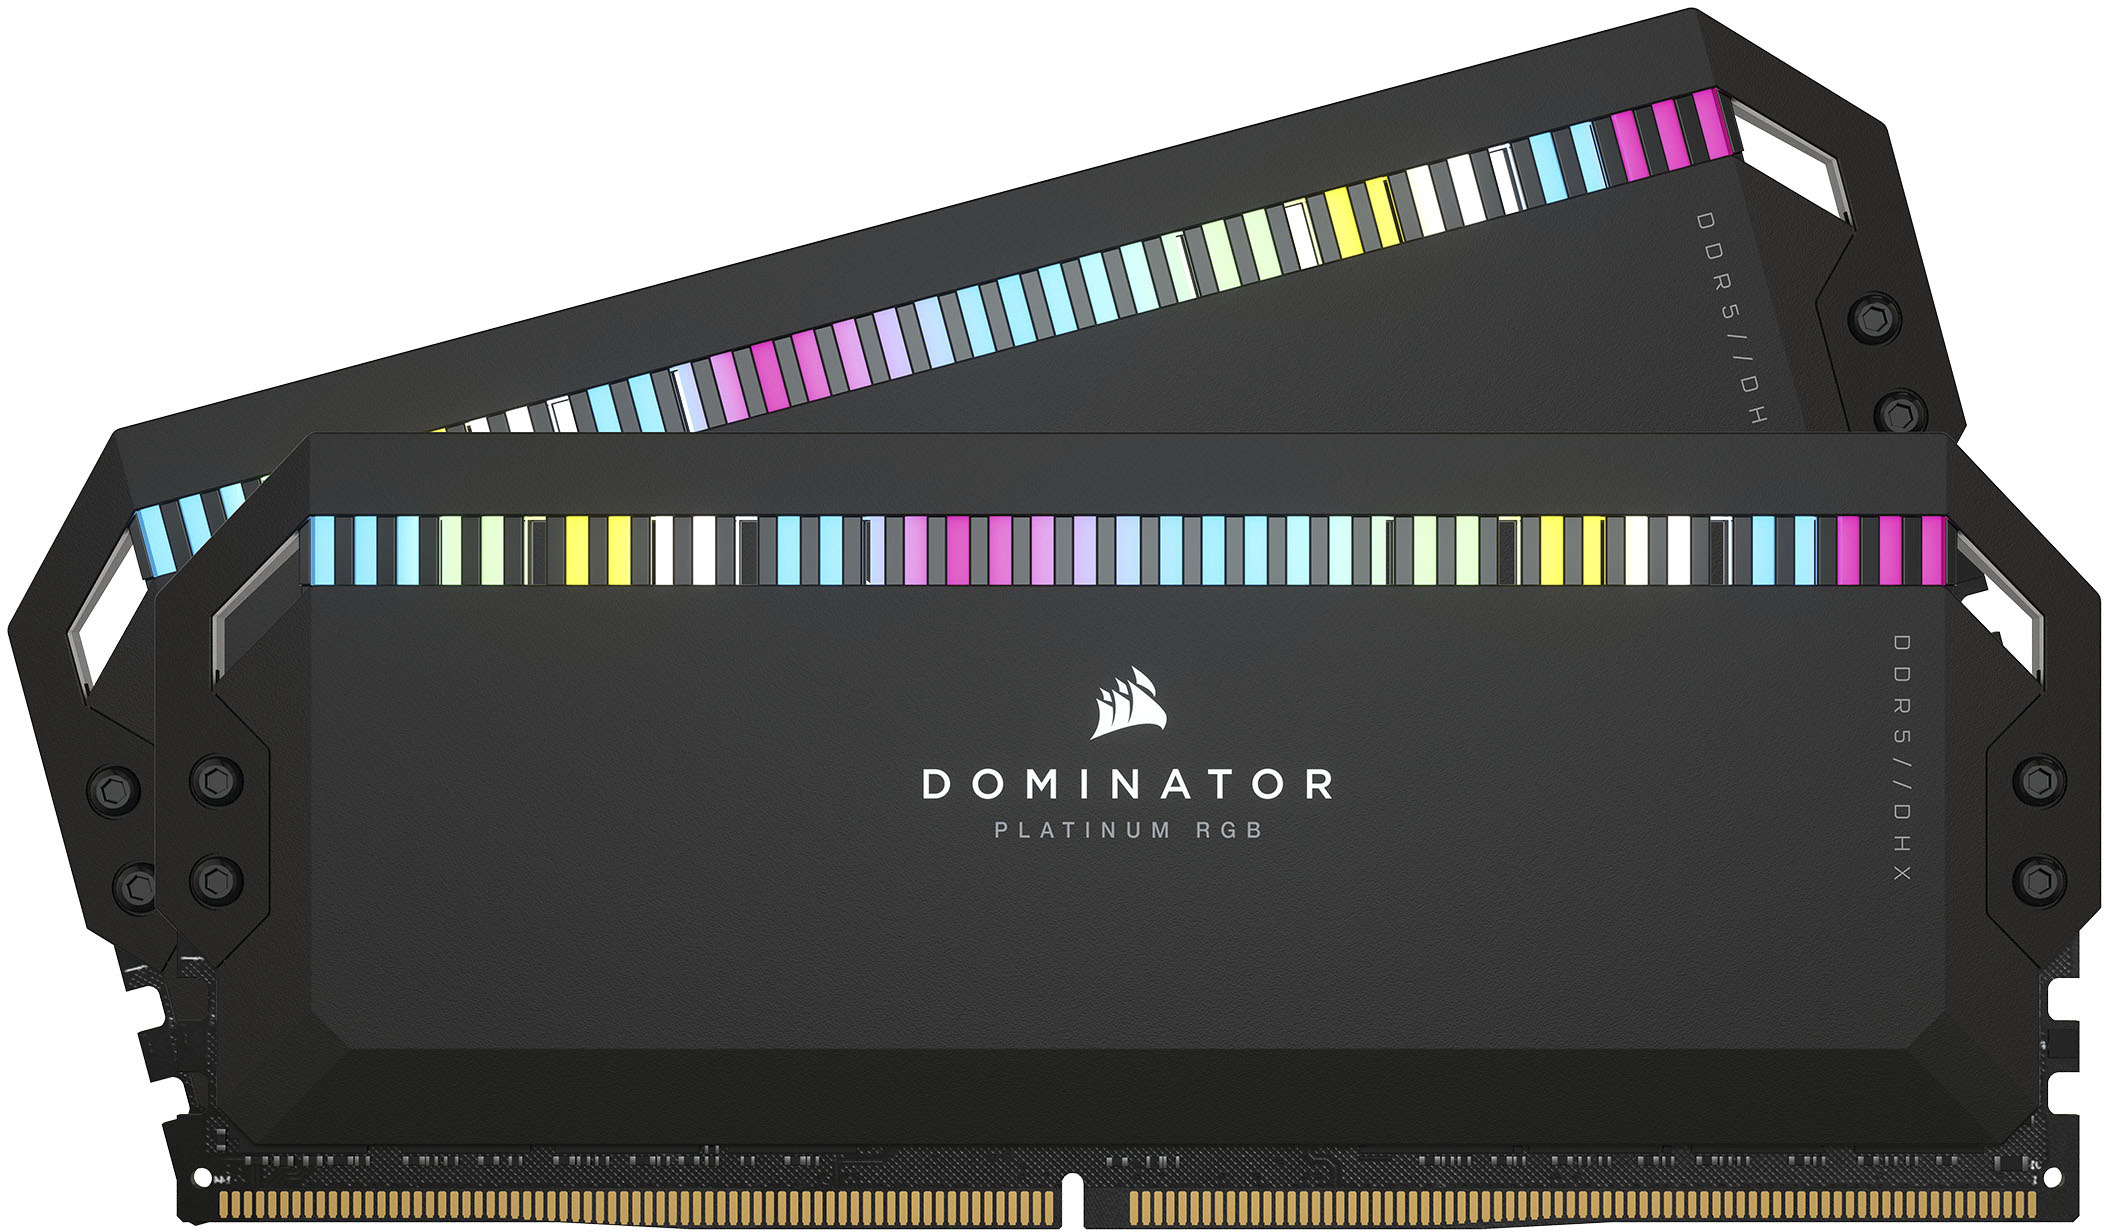 Corsair Vengeance RGB Pro 2x 32GB DDR4-3200 Review: 64GB In the